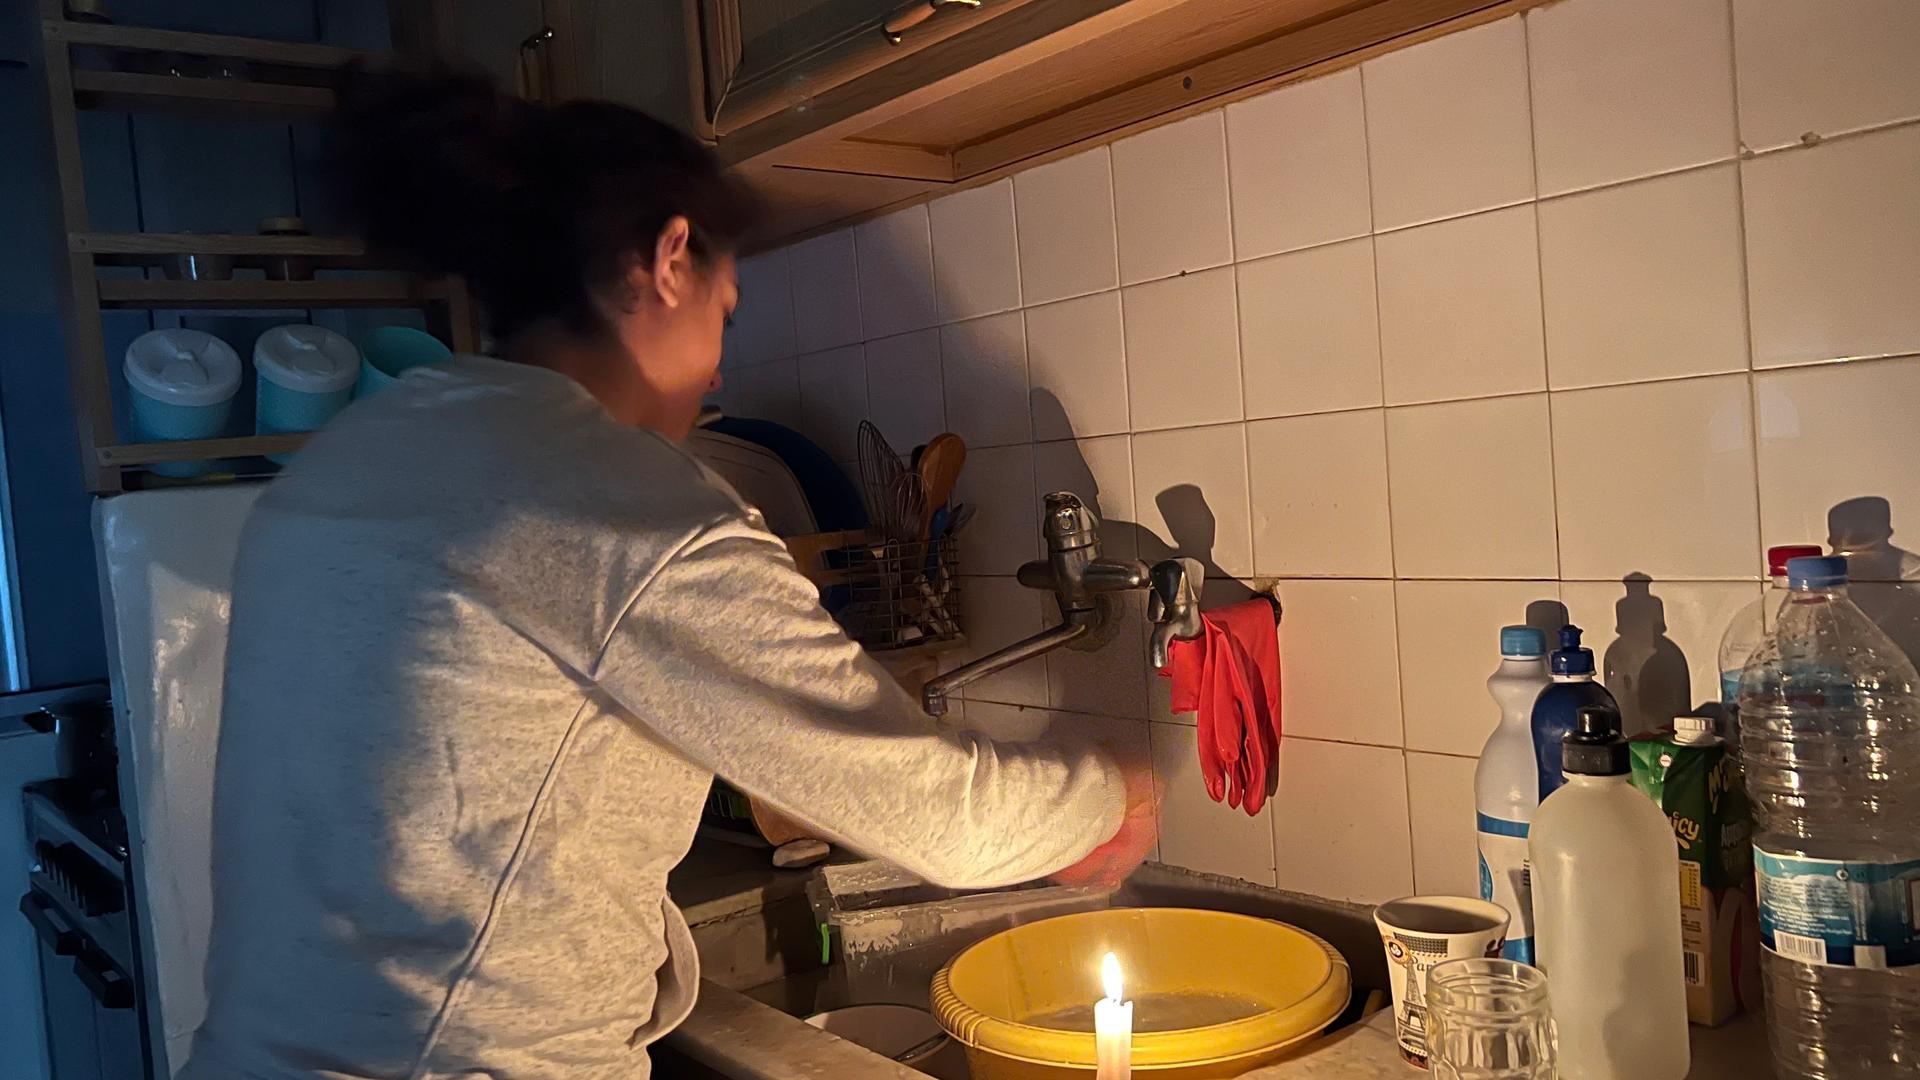 Diala Attieh Younes, 39, washes dishes under candlelight in her kitchen in Beirut. She said her generator-supplied electricity bill has increased six folds since last year.